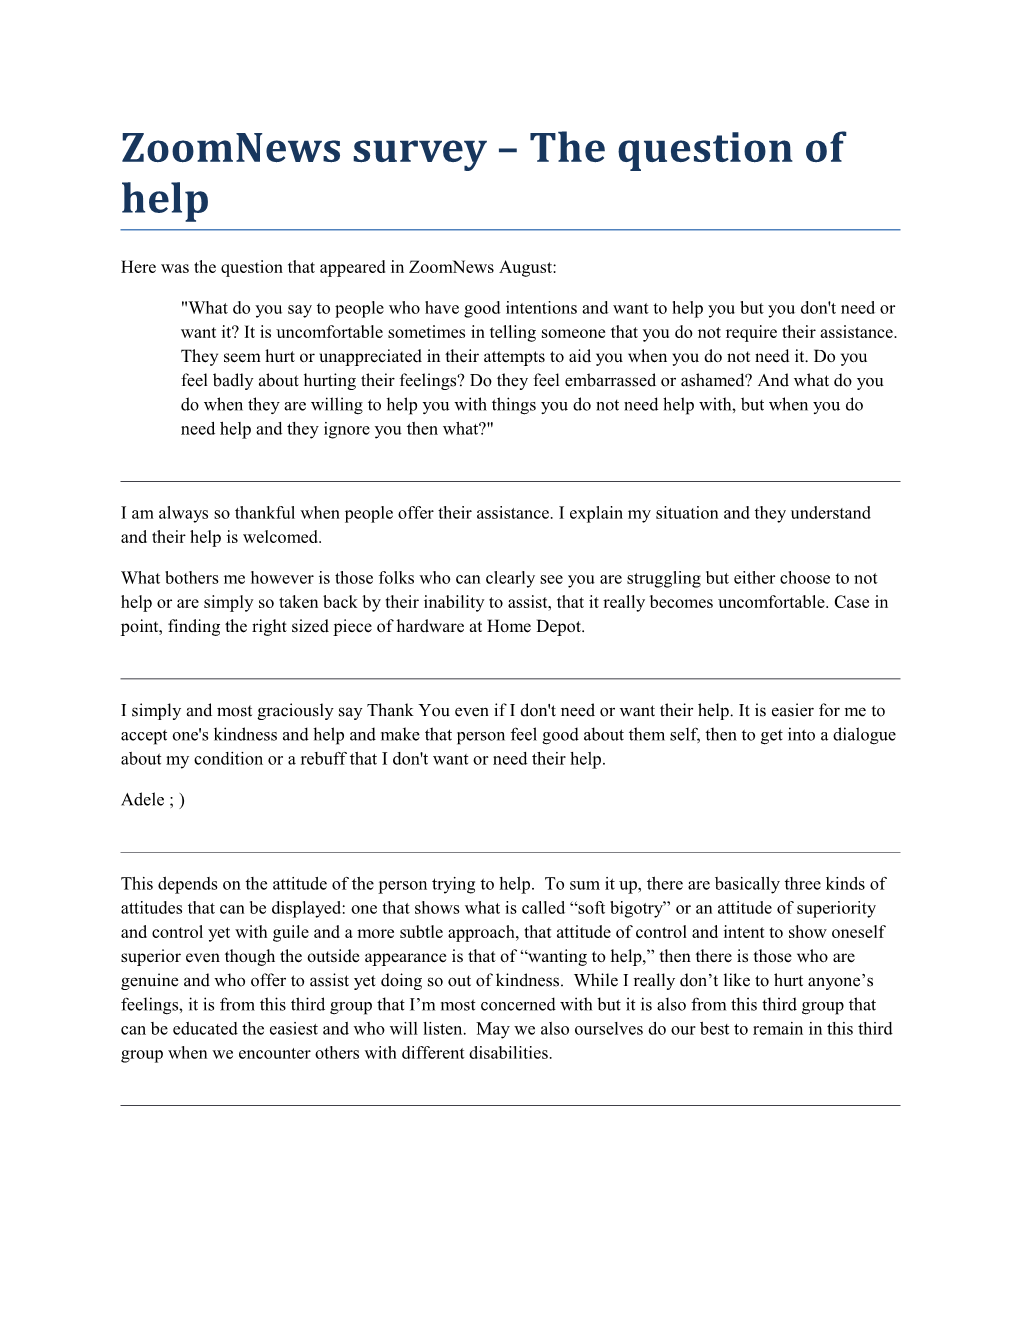 Zoomnews Survey the Question of Help